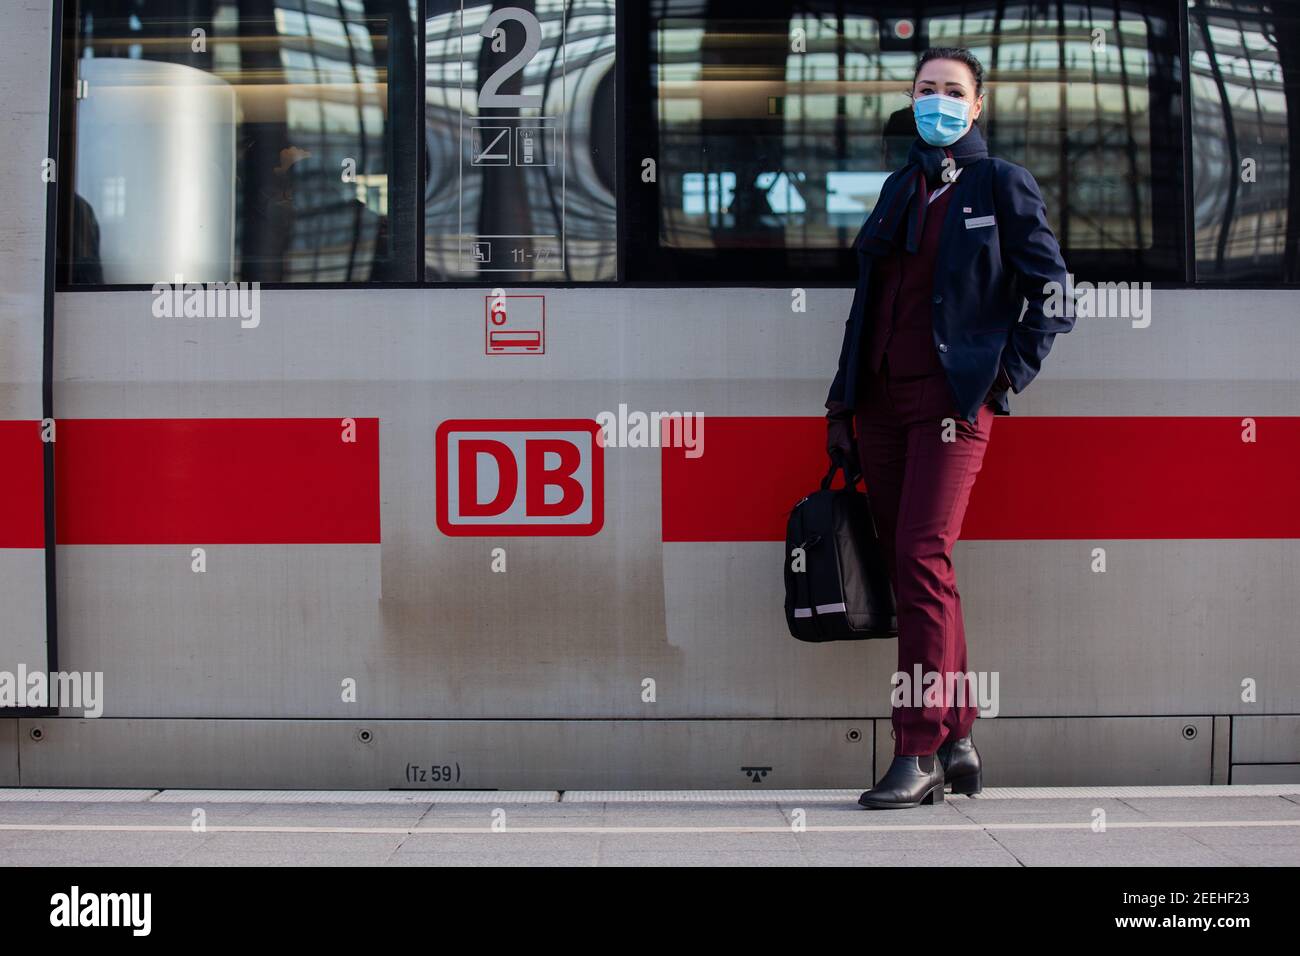 Cologne, Germany. 11th Feb, 2021. Nadine Perlinger dos Santos, former stewardess at Lufthansa subsidiary Germanwings and now a Deutsche Bahn train attendant, stands in front of an ICE train. Job prospects for pilots, flight attendants and aircraft technicians have deteriorated massively in the Corona crisis. In the reorientation, a state-owned company apparently offers advantages. (to dpa 'From the jet to the ICE - Flying personnel highly welcome at Bahn') Credit: Rolf Vennenbernd/dpa/Alamy Live News Stock Photo